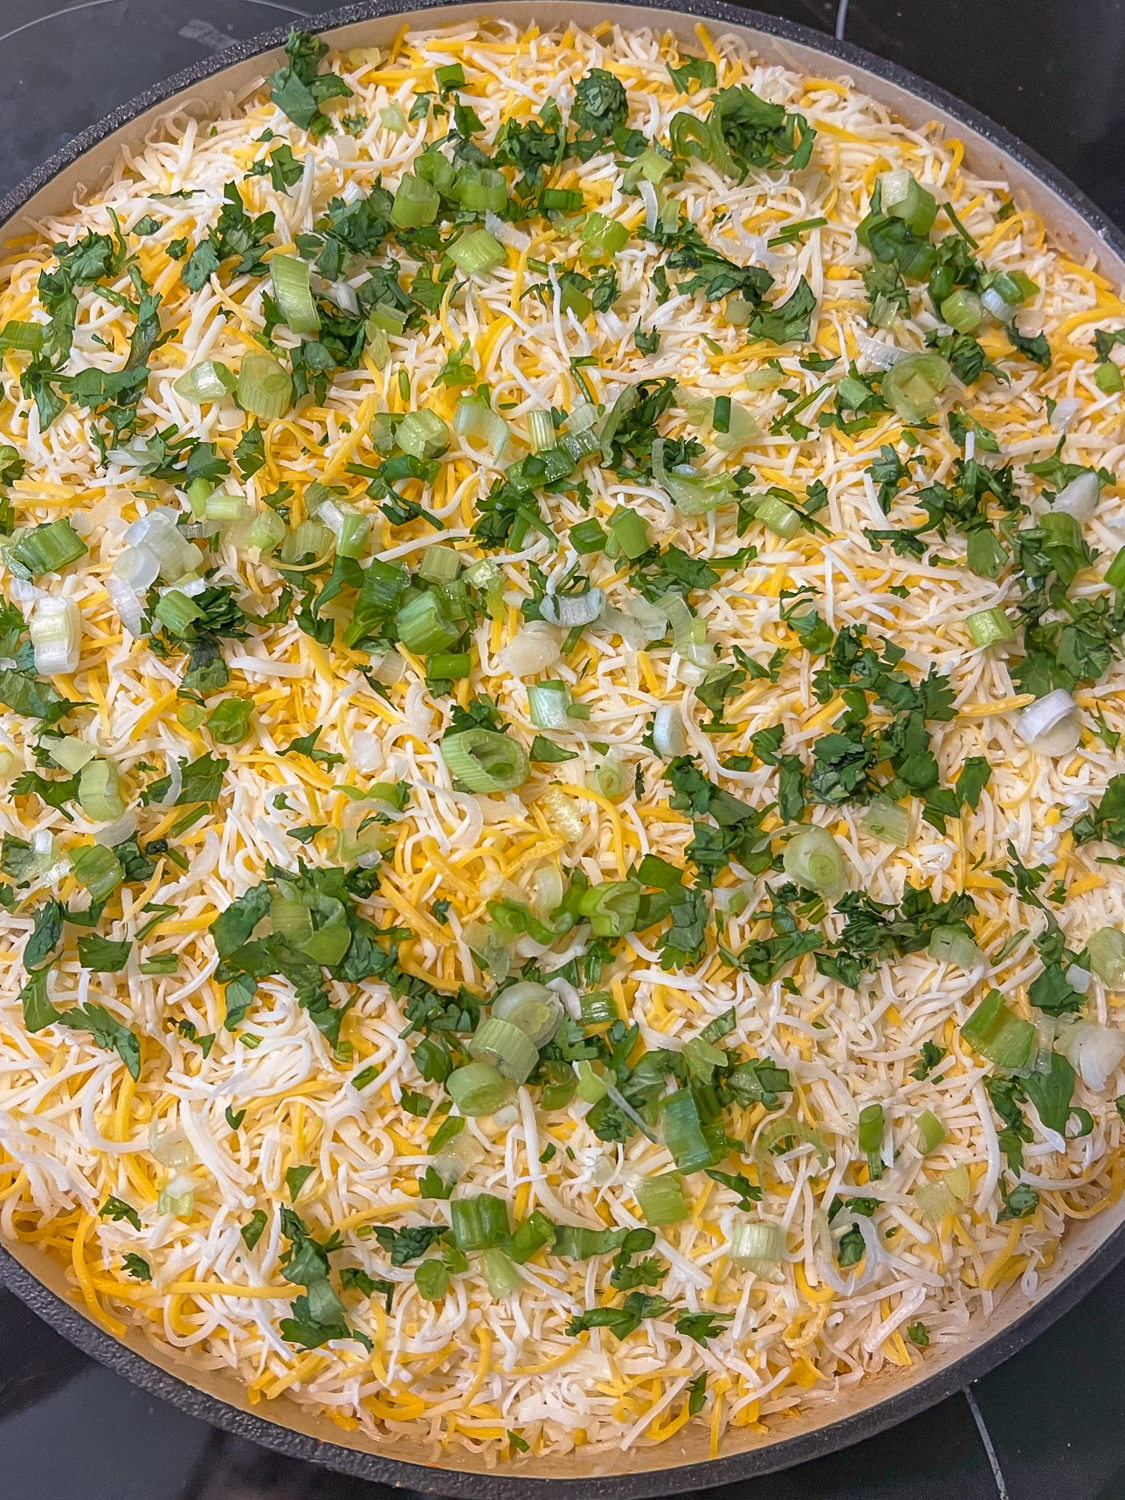 Freshly chopped cilantro and green onions sprinkled on the top.